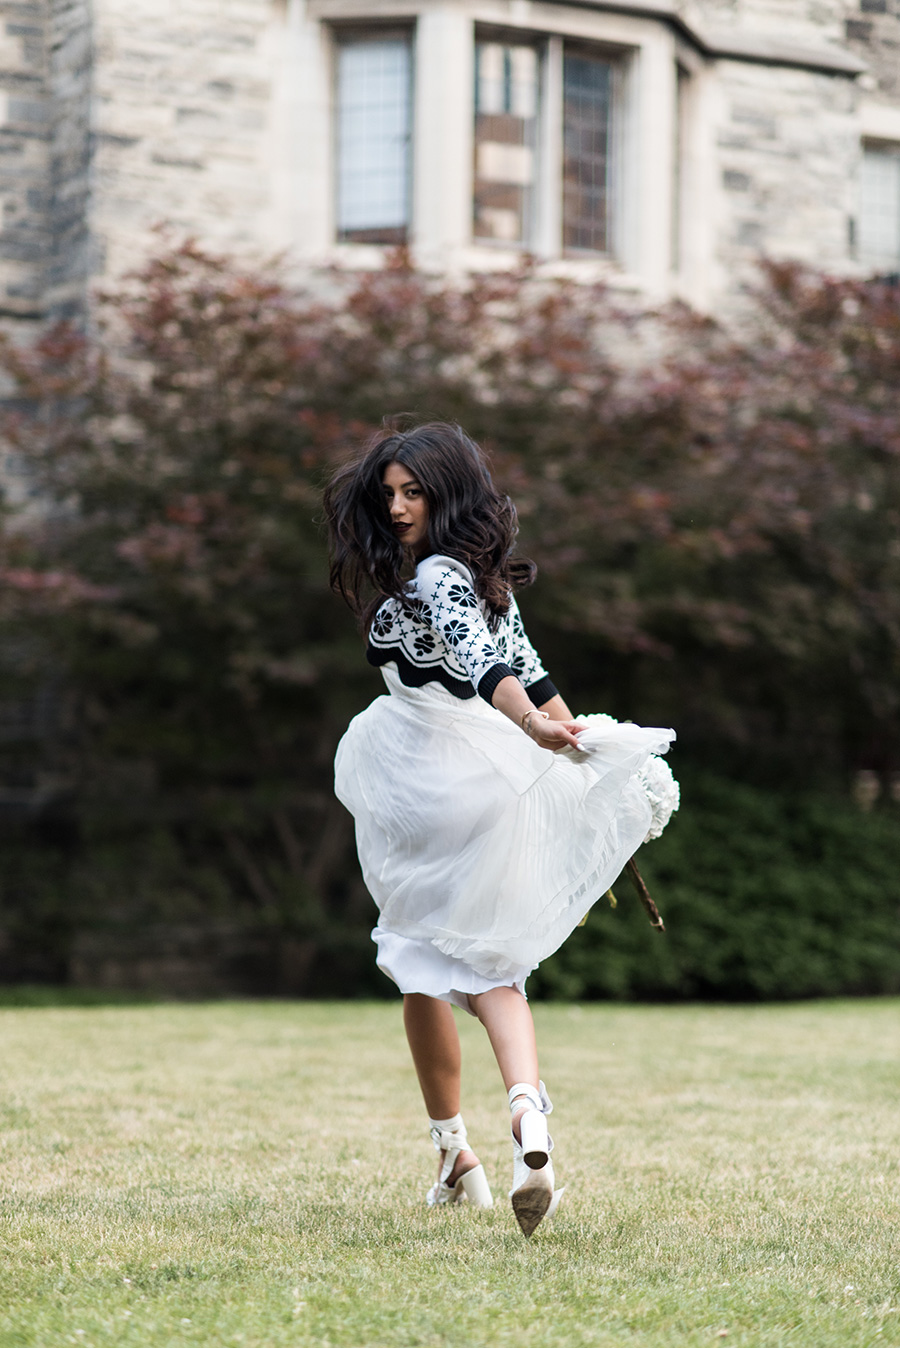 dior spring summer 2016 white sheer dress cropped knit sweater ankle wrap heels white not your standard model kayla seah fashion style editorial beautiful casa loma castle photography blogger not your standard